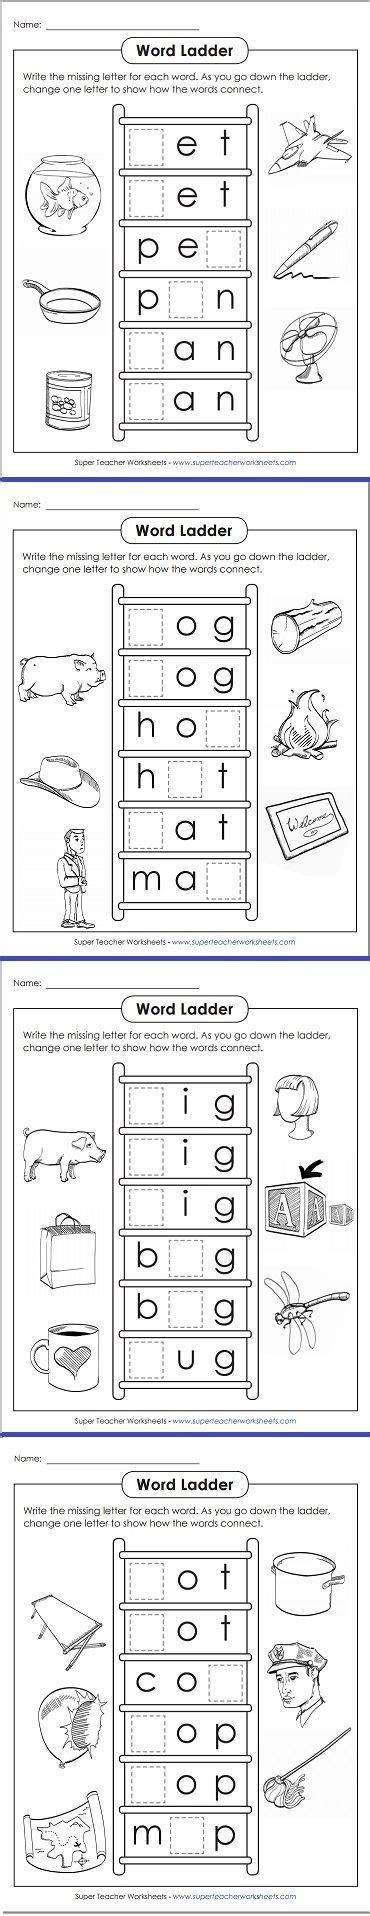 Socialization is part of the learning in first grade. Take a look at these fun word ladders for phonics practice ...